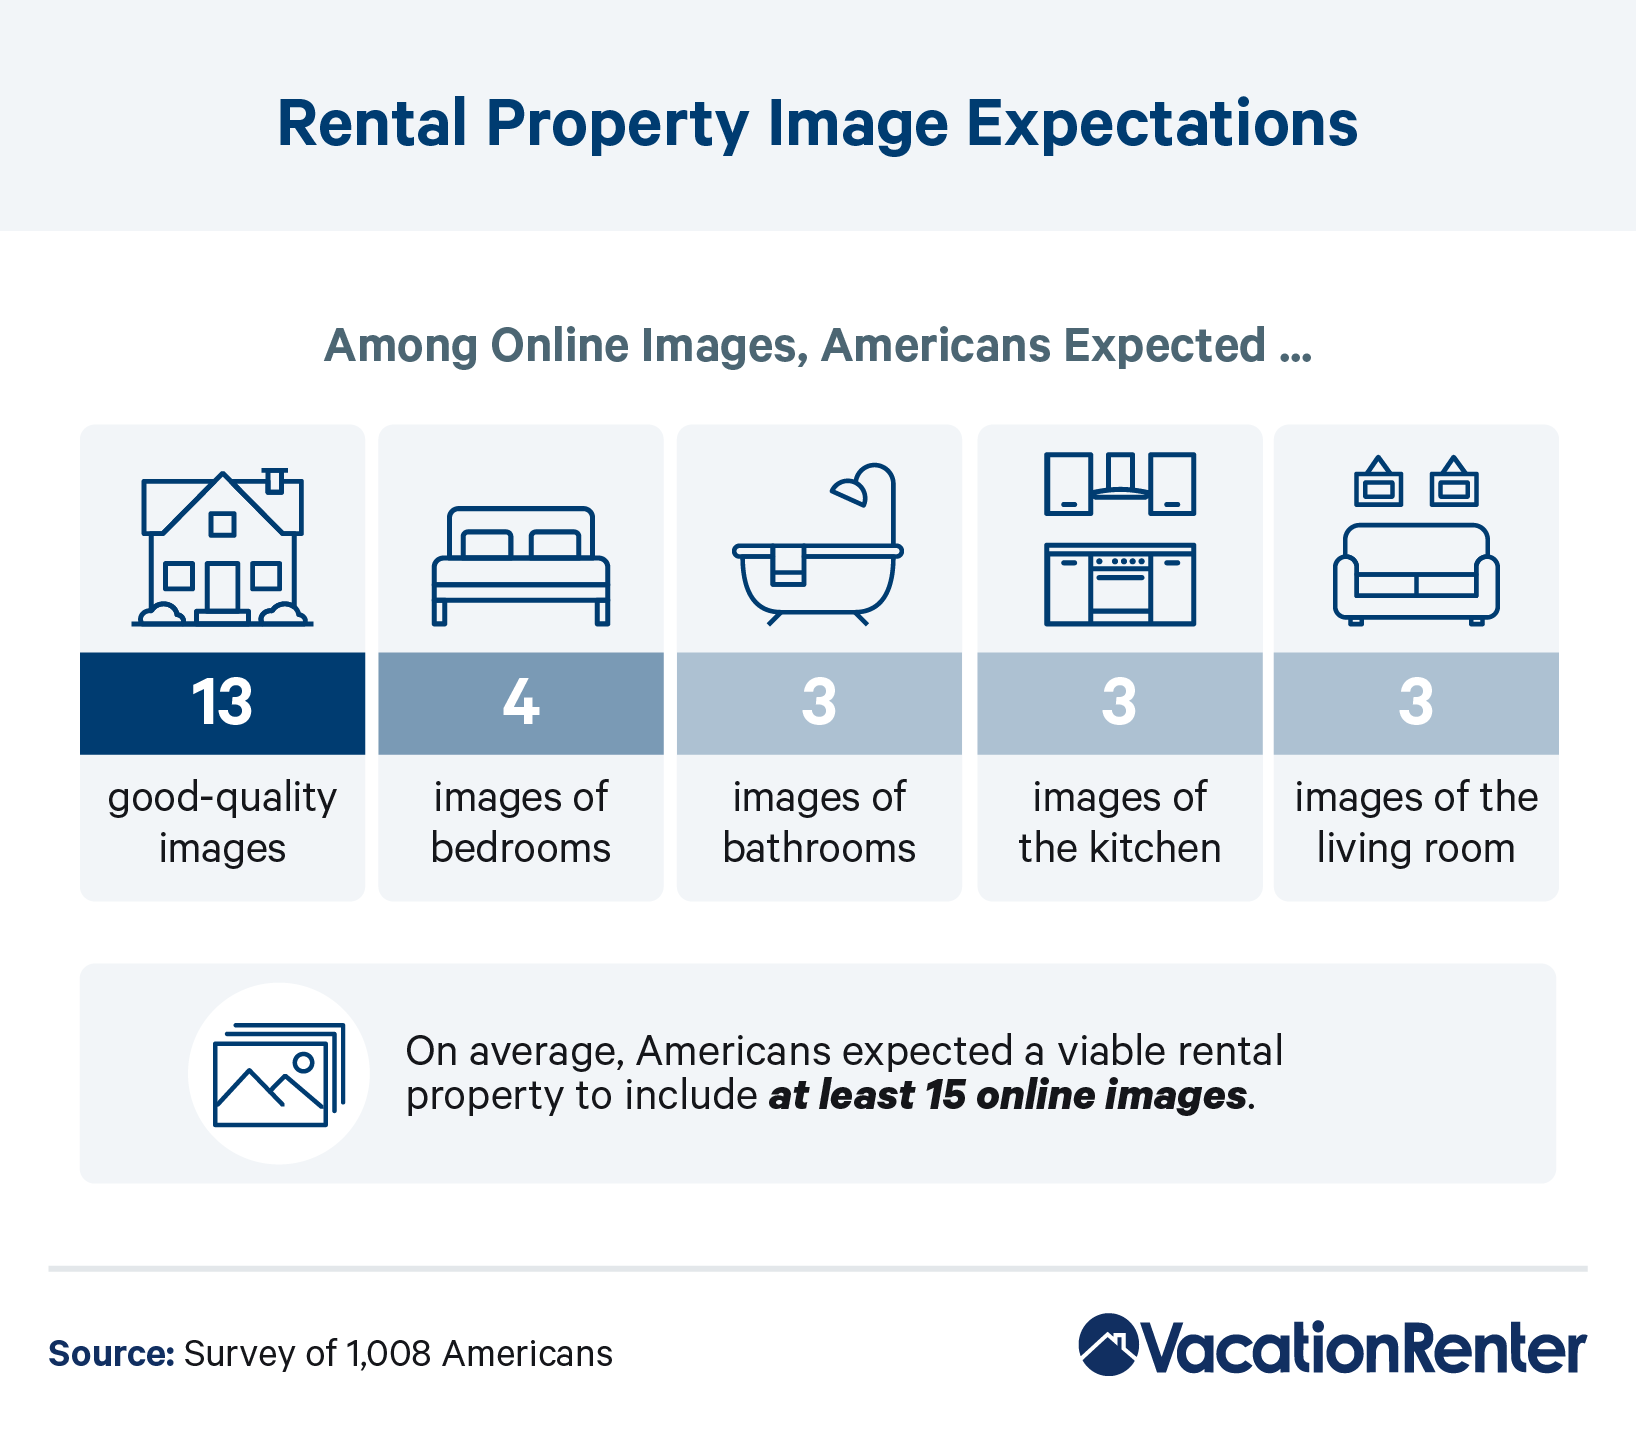 Rental property image expectations of Americans